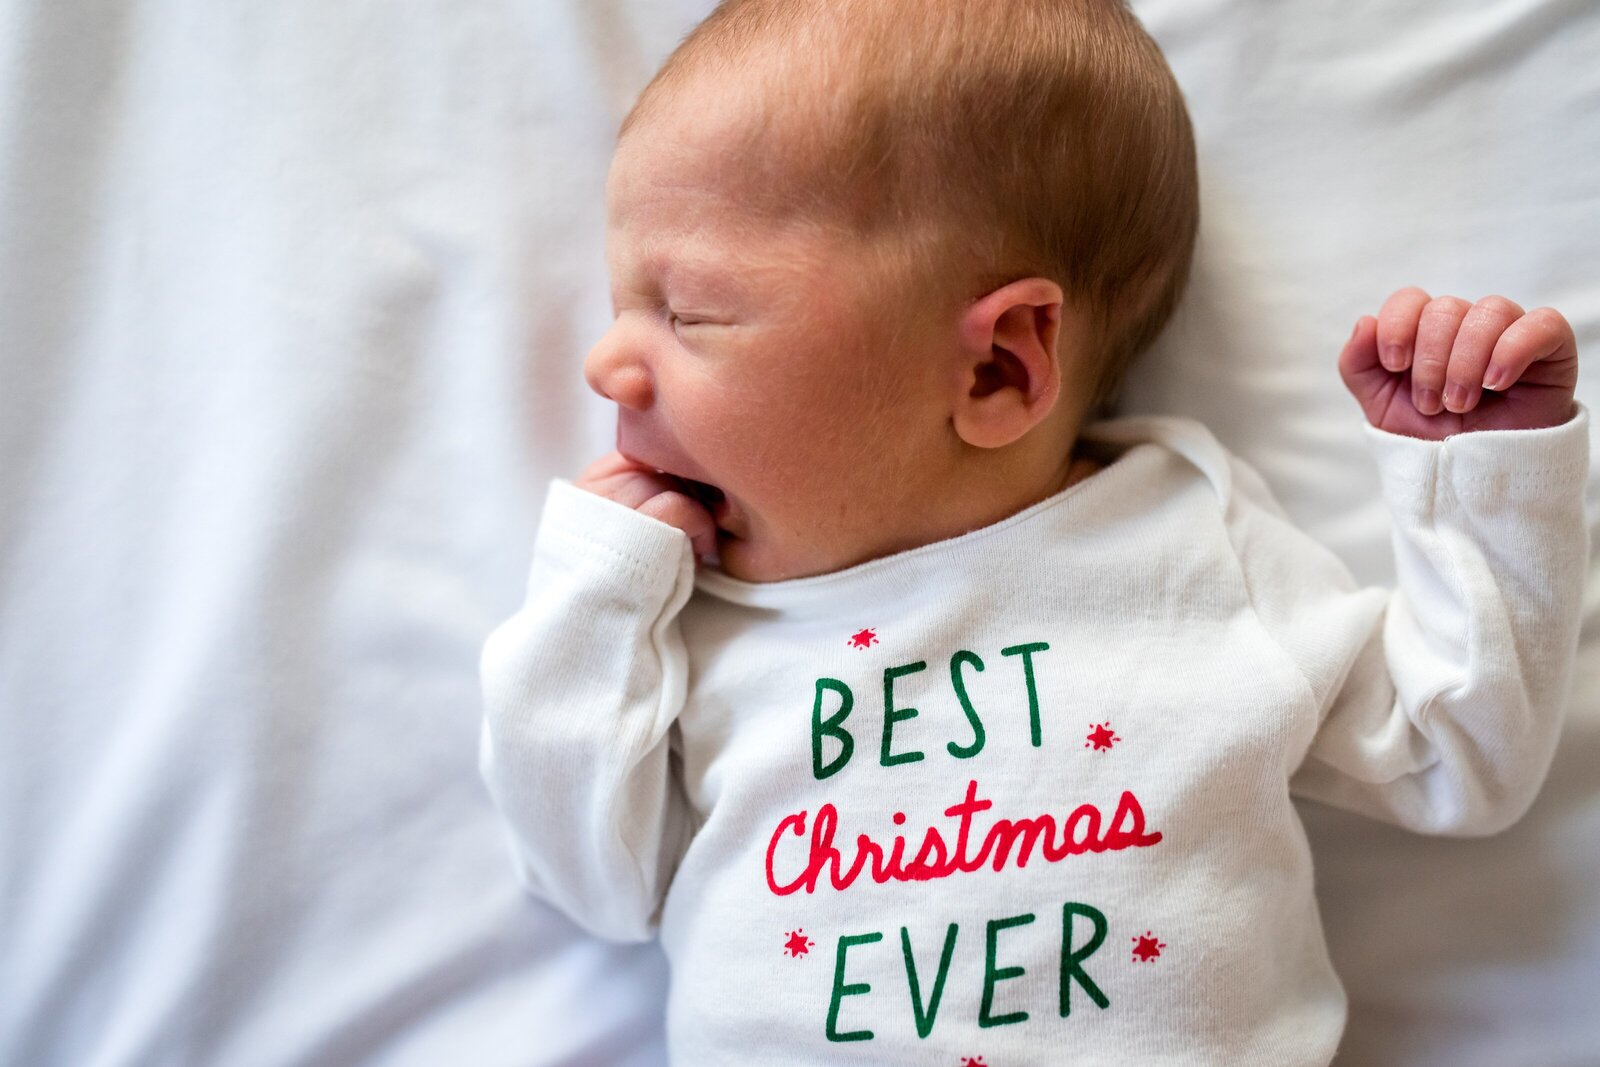 Newborn baby wearing best christmas ever outfit